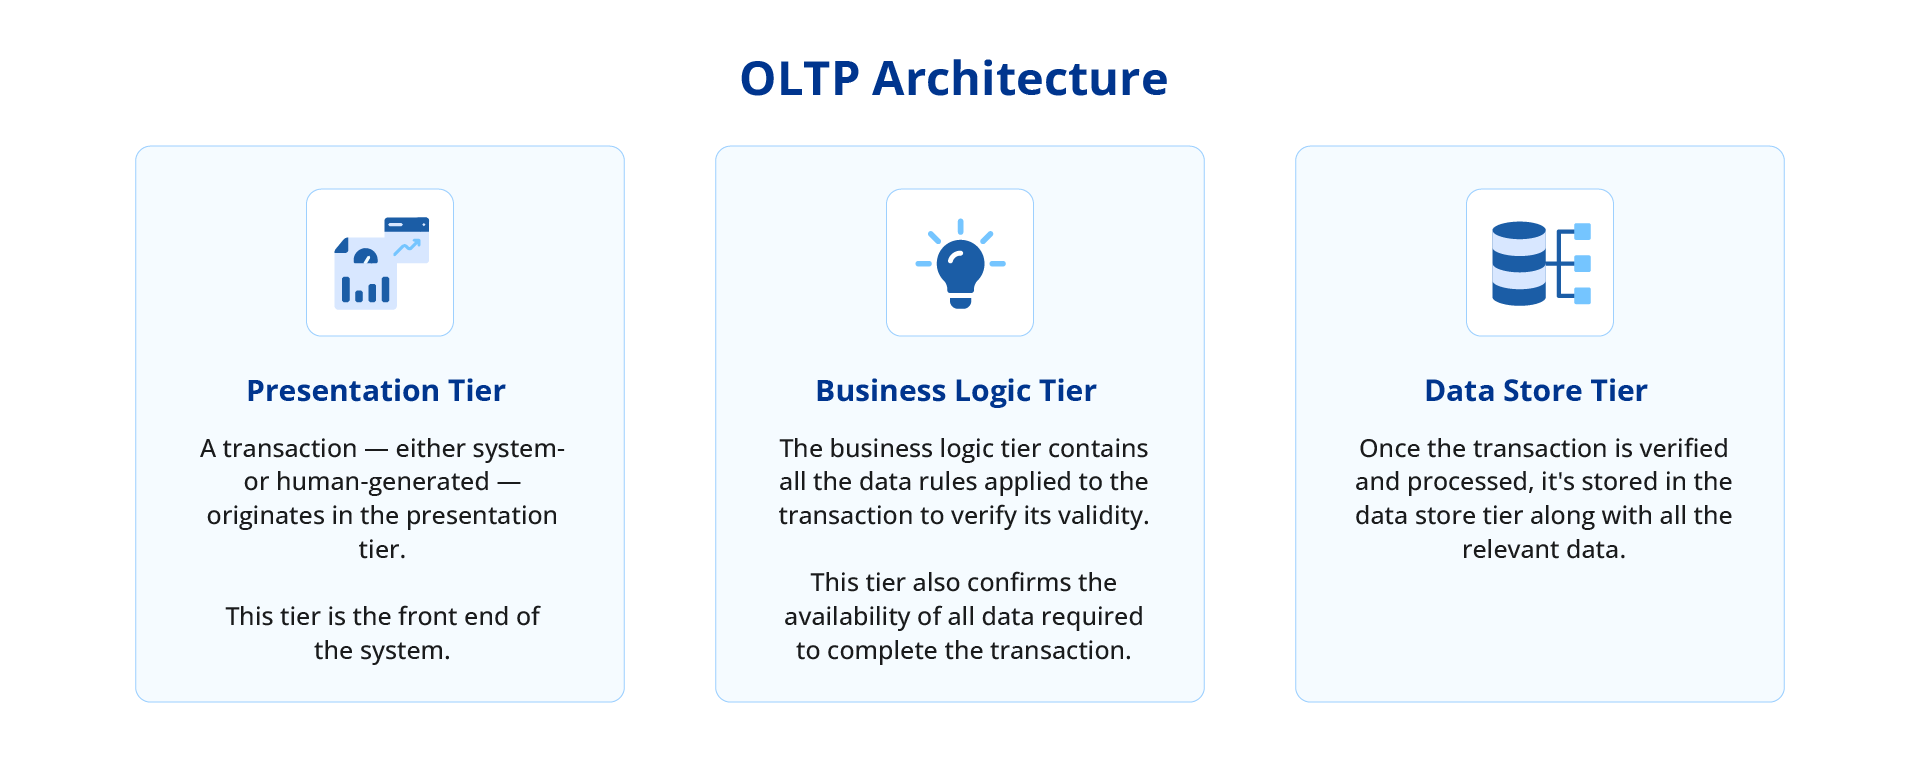 An image discussing the OLTP architecture.